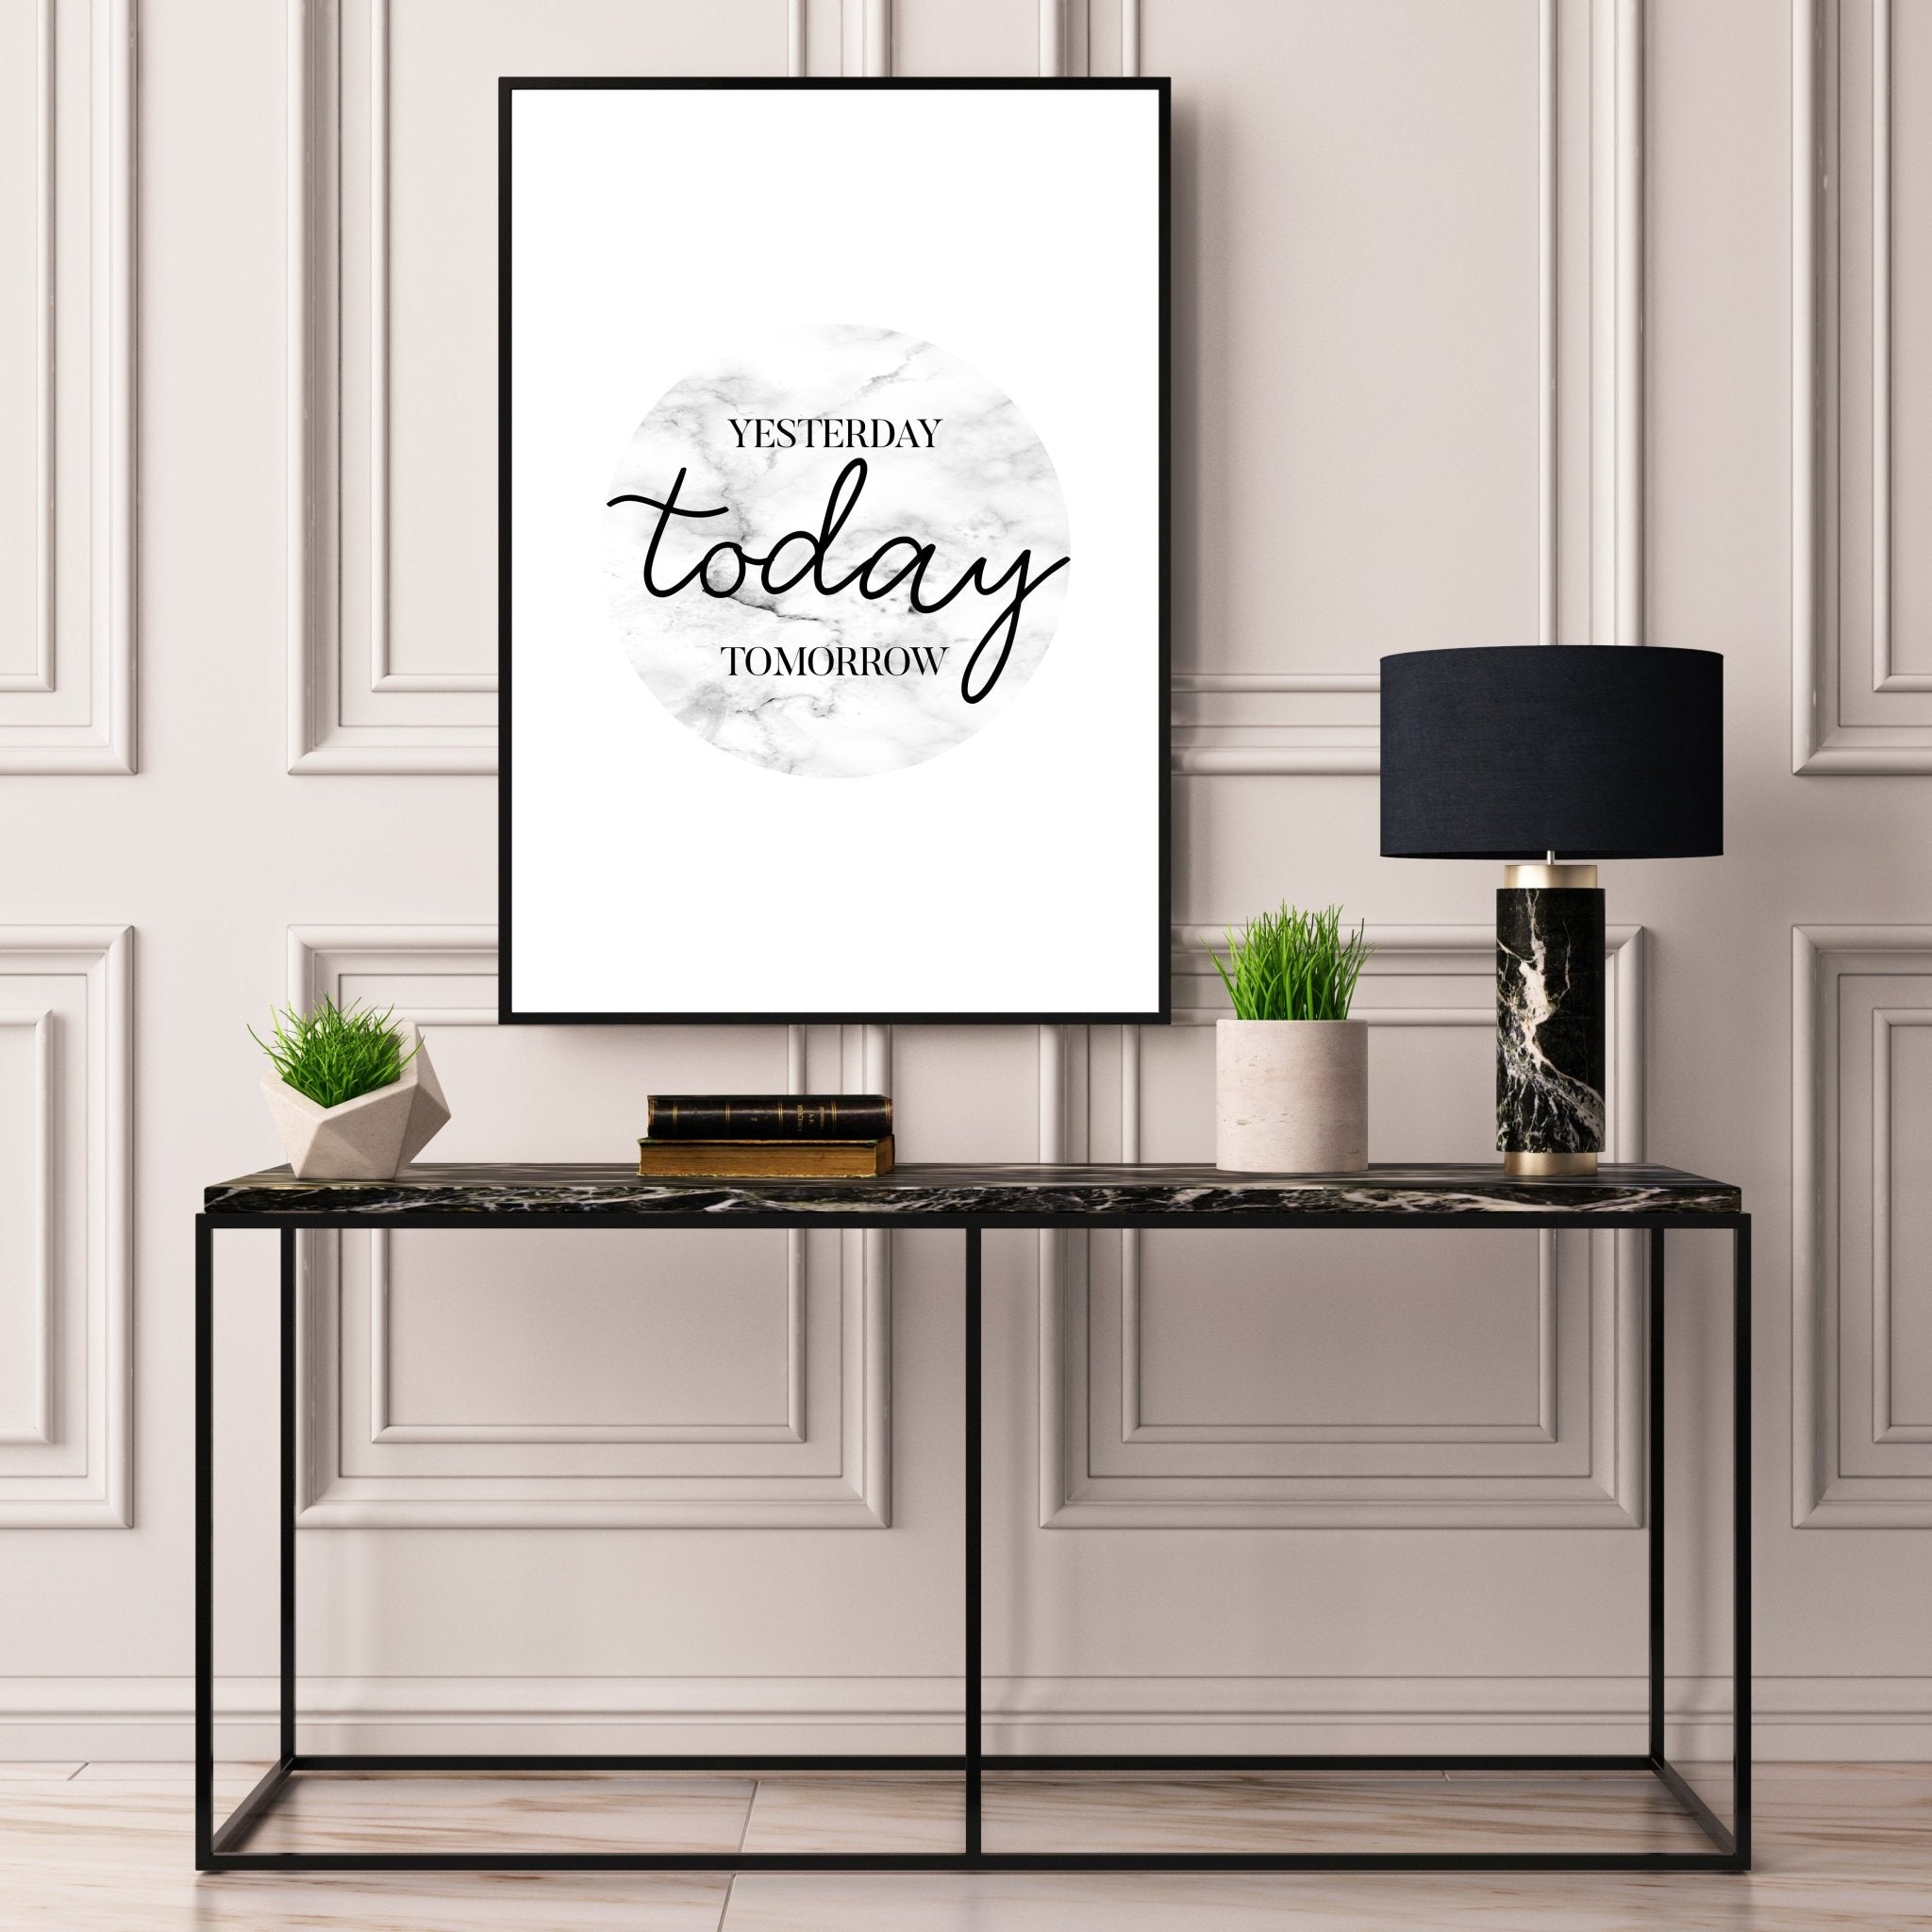 Yesterday Today Tomorrow - D'Luxe Prints